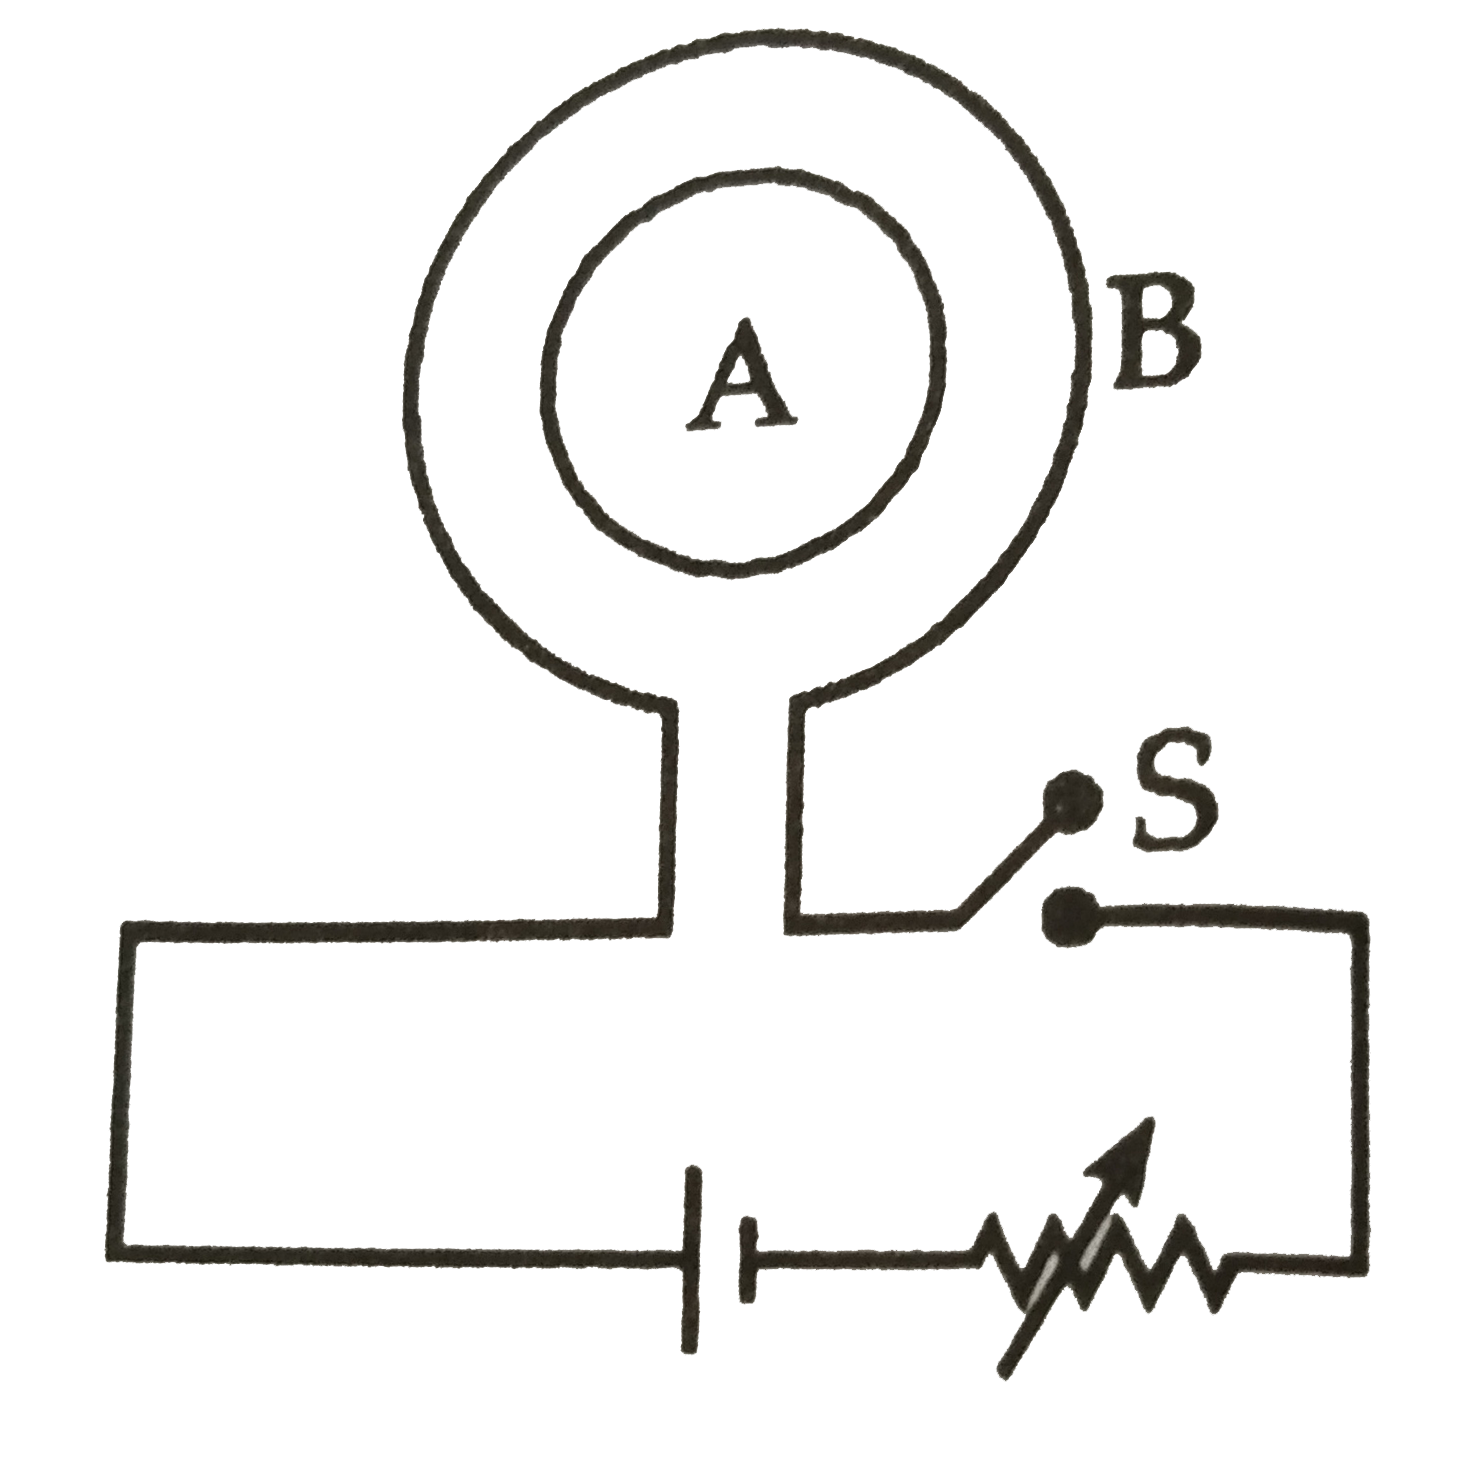 A closed circular wire loop A lies in the plane of longer loop B, which is connected to the battery as shown in the figure. The direction of current induced in the loop A when the switch S is closed is